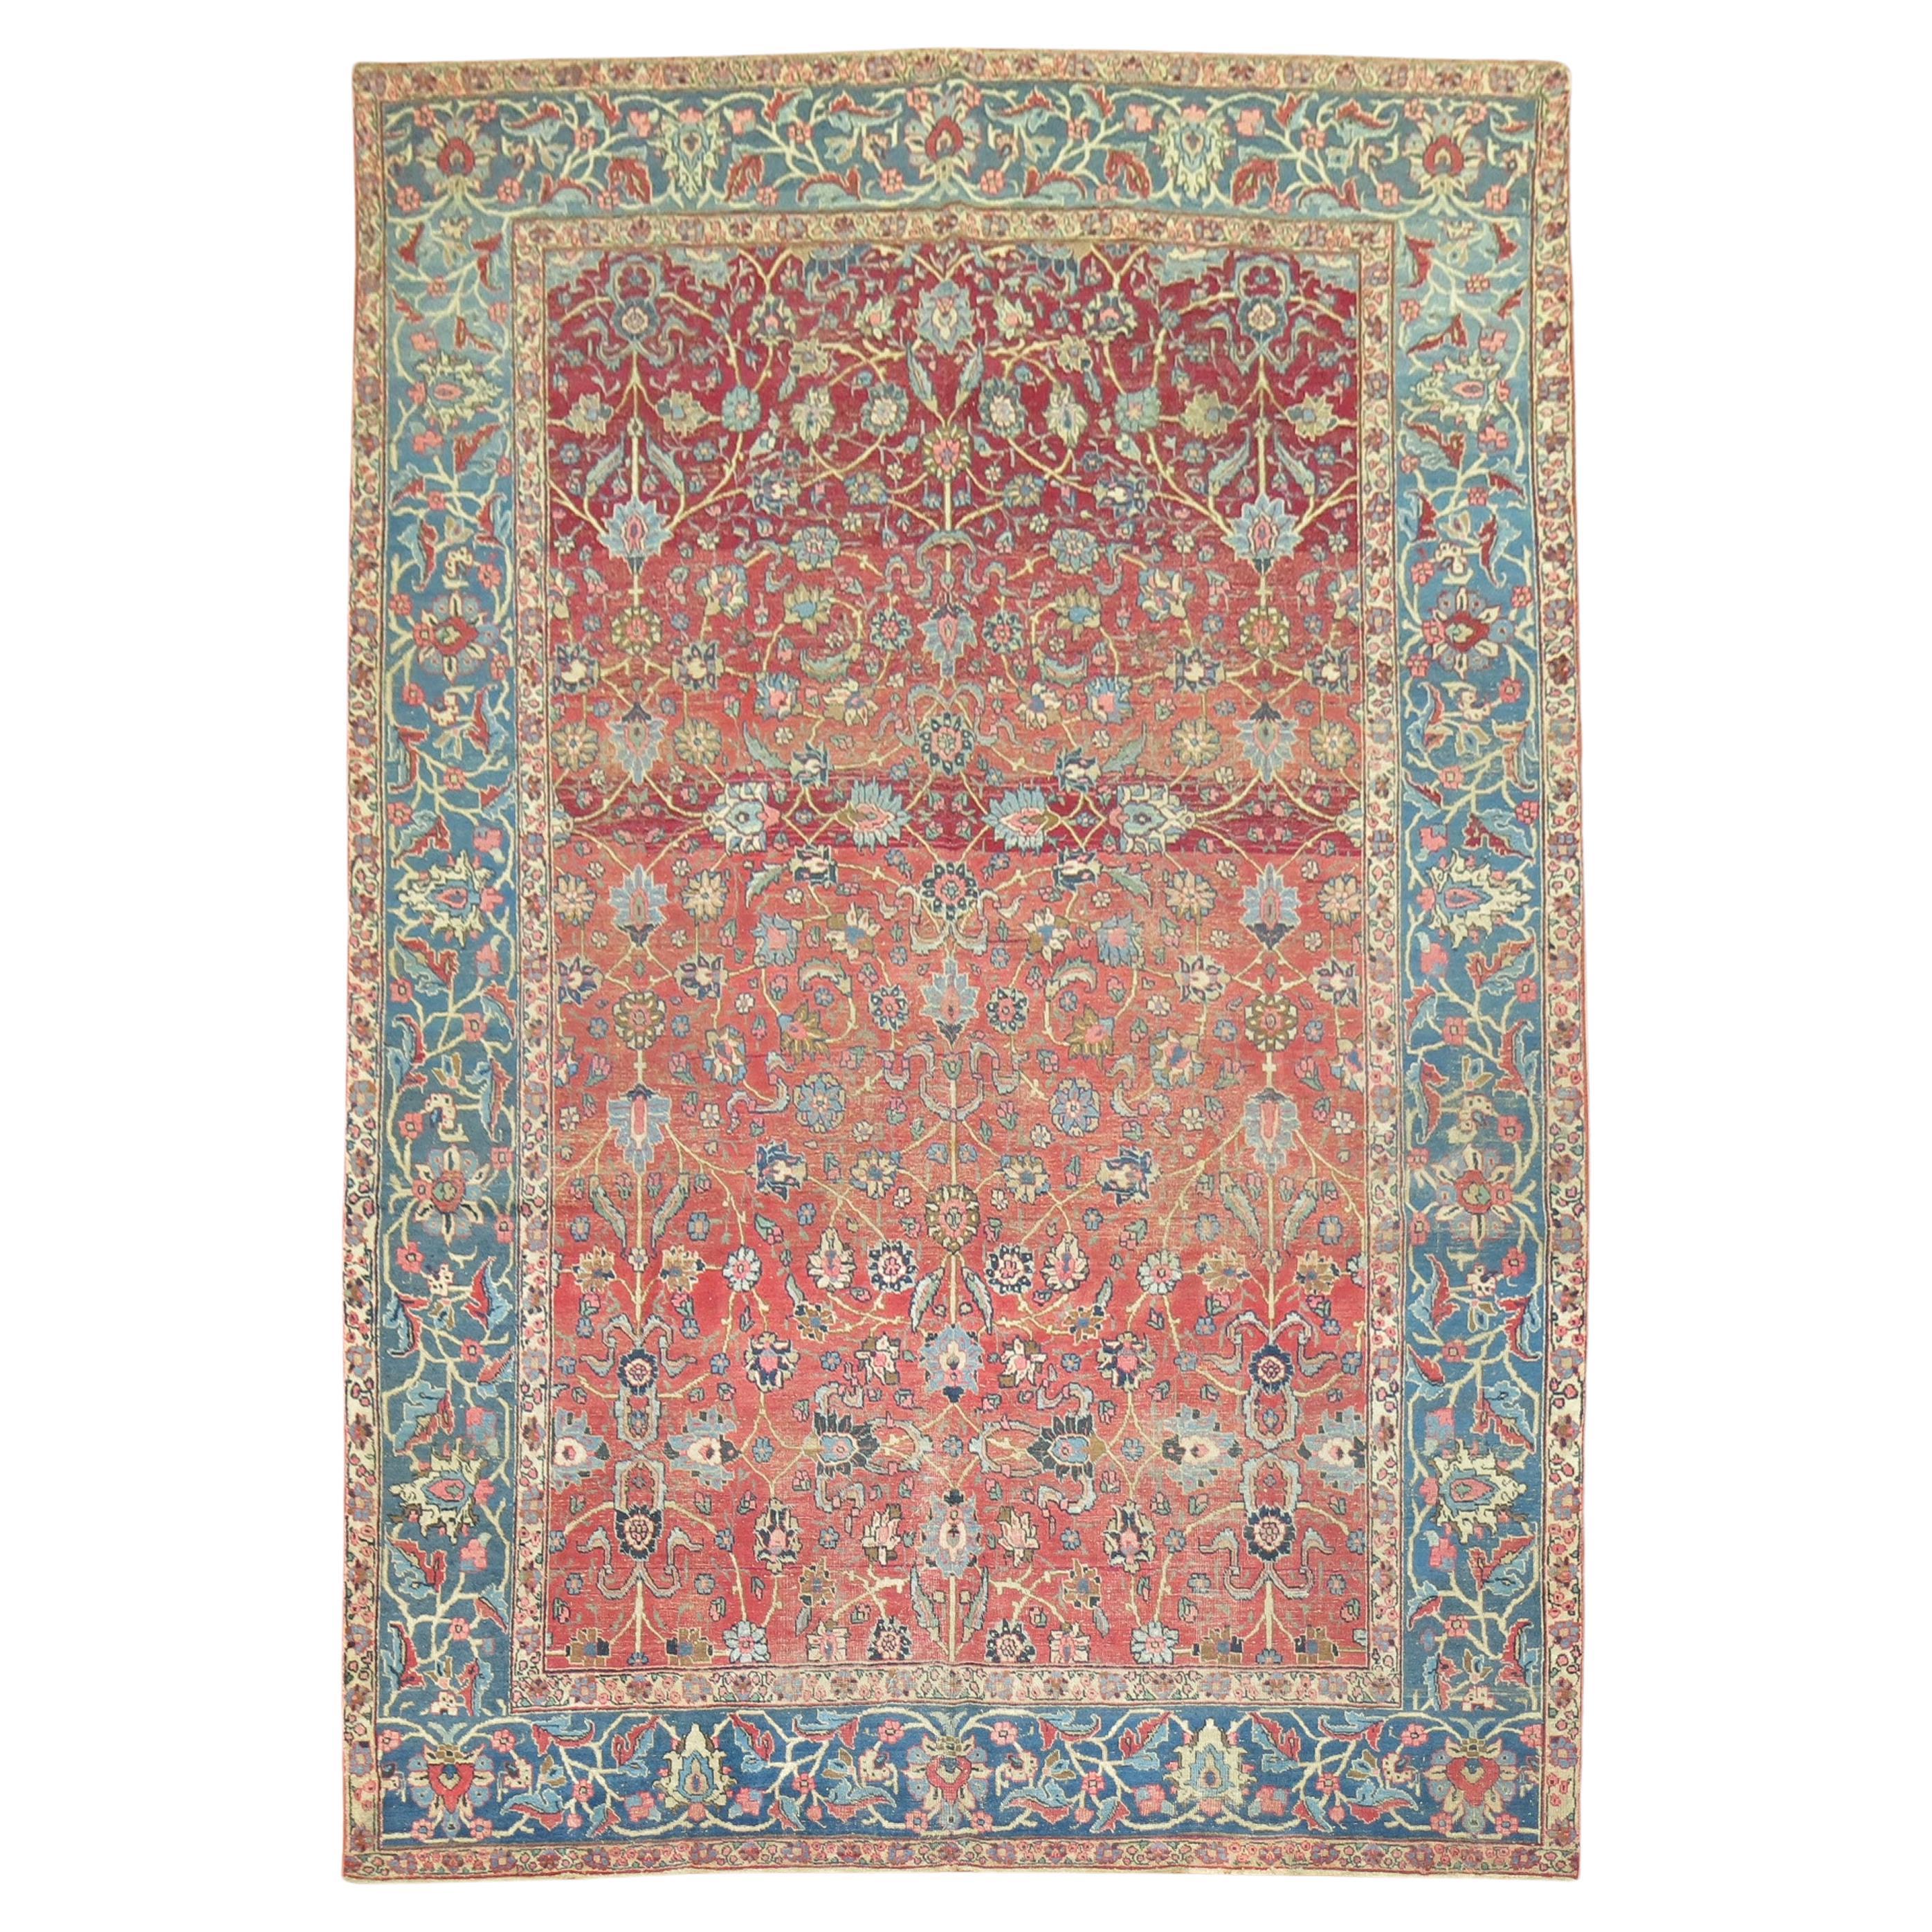 Early 20th Century Room Size Antique Persian Tabriz Rug